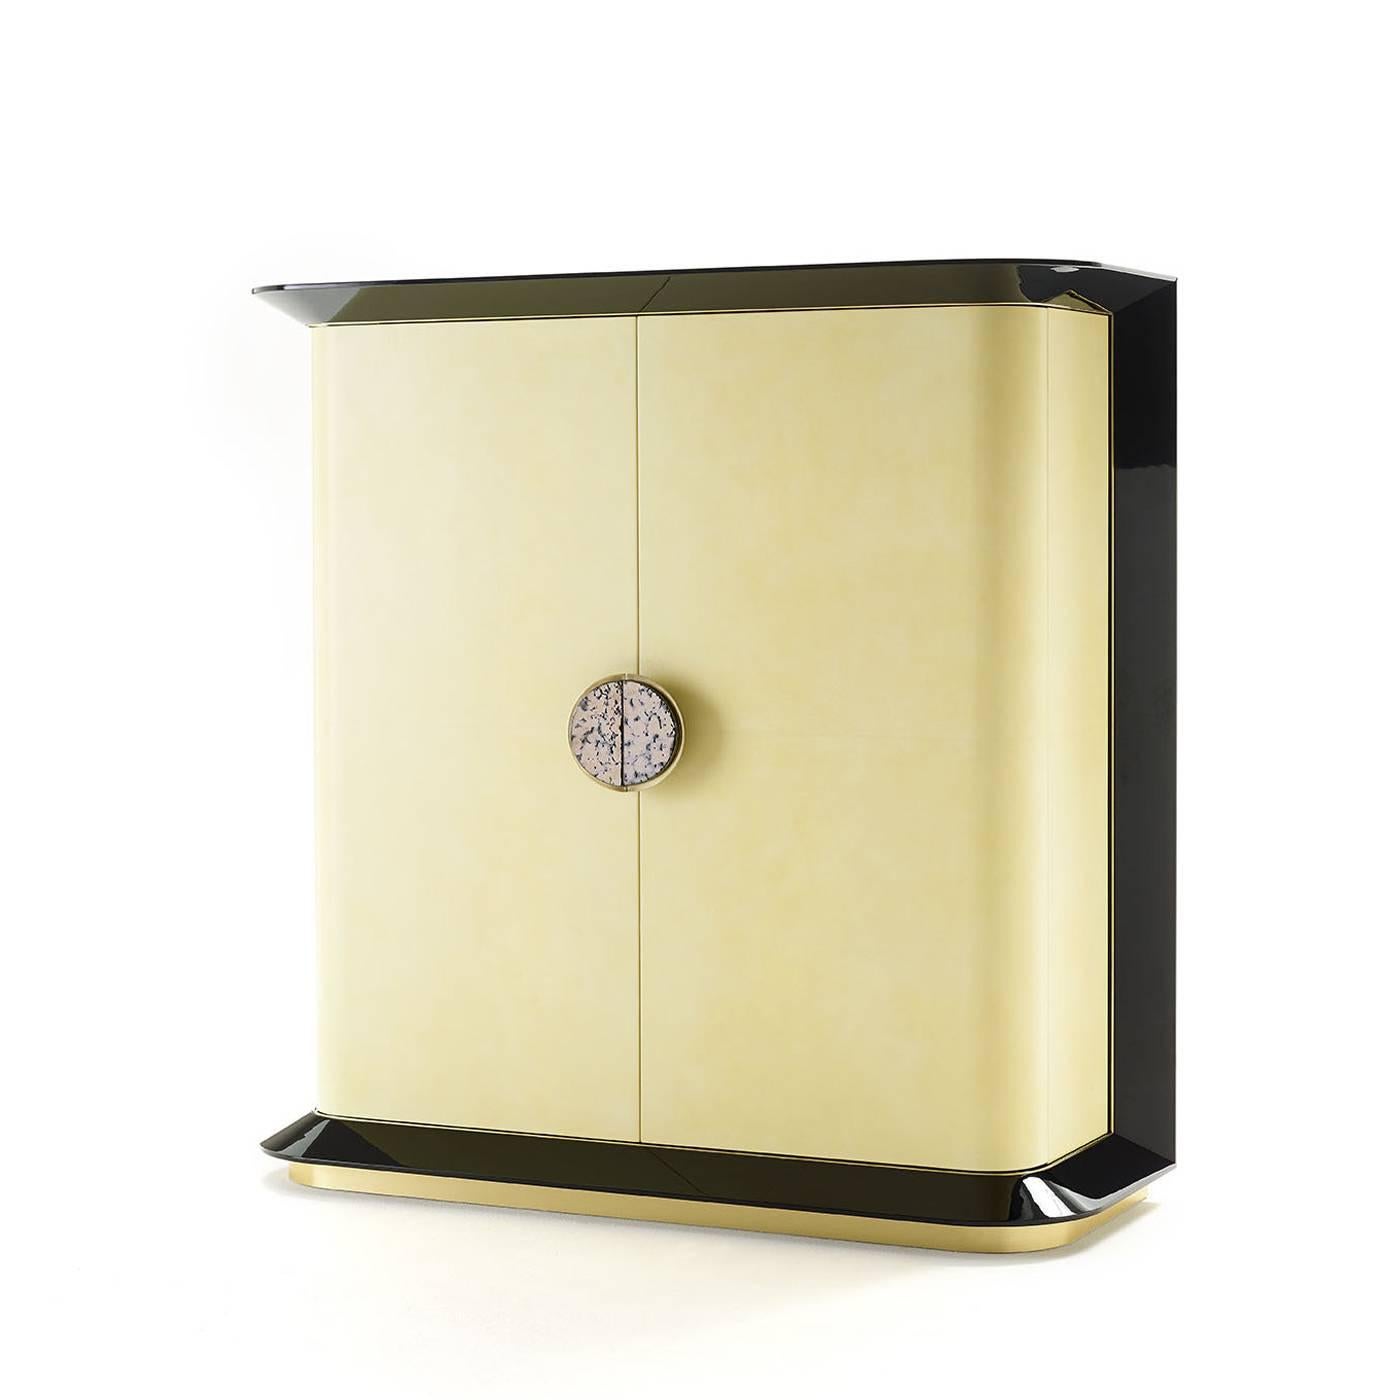 This elegant and functional yellow top cabinet designed by Studio 63 for Marioni features double doors lined with parchment and ceramic decorative elements and a perimeter structure in black glossy wood.